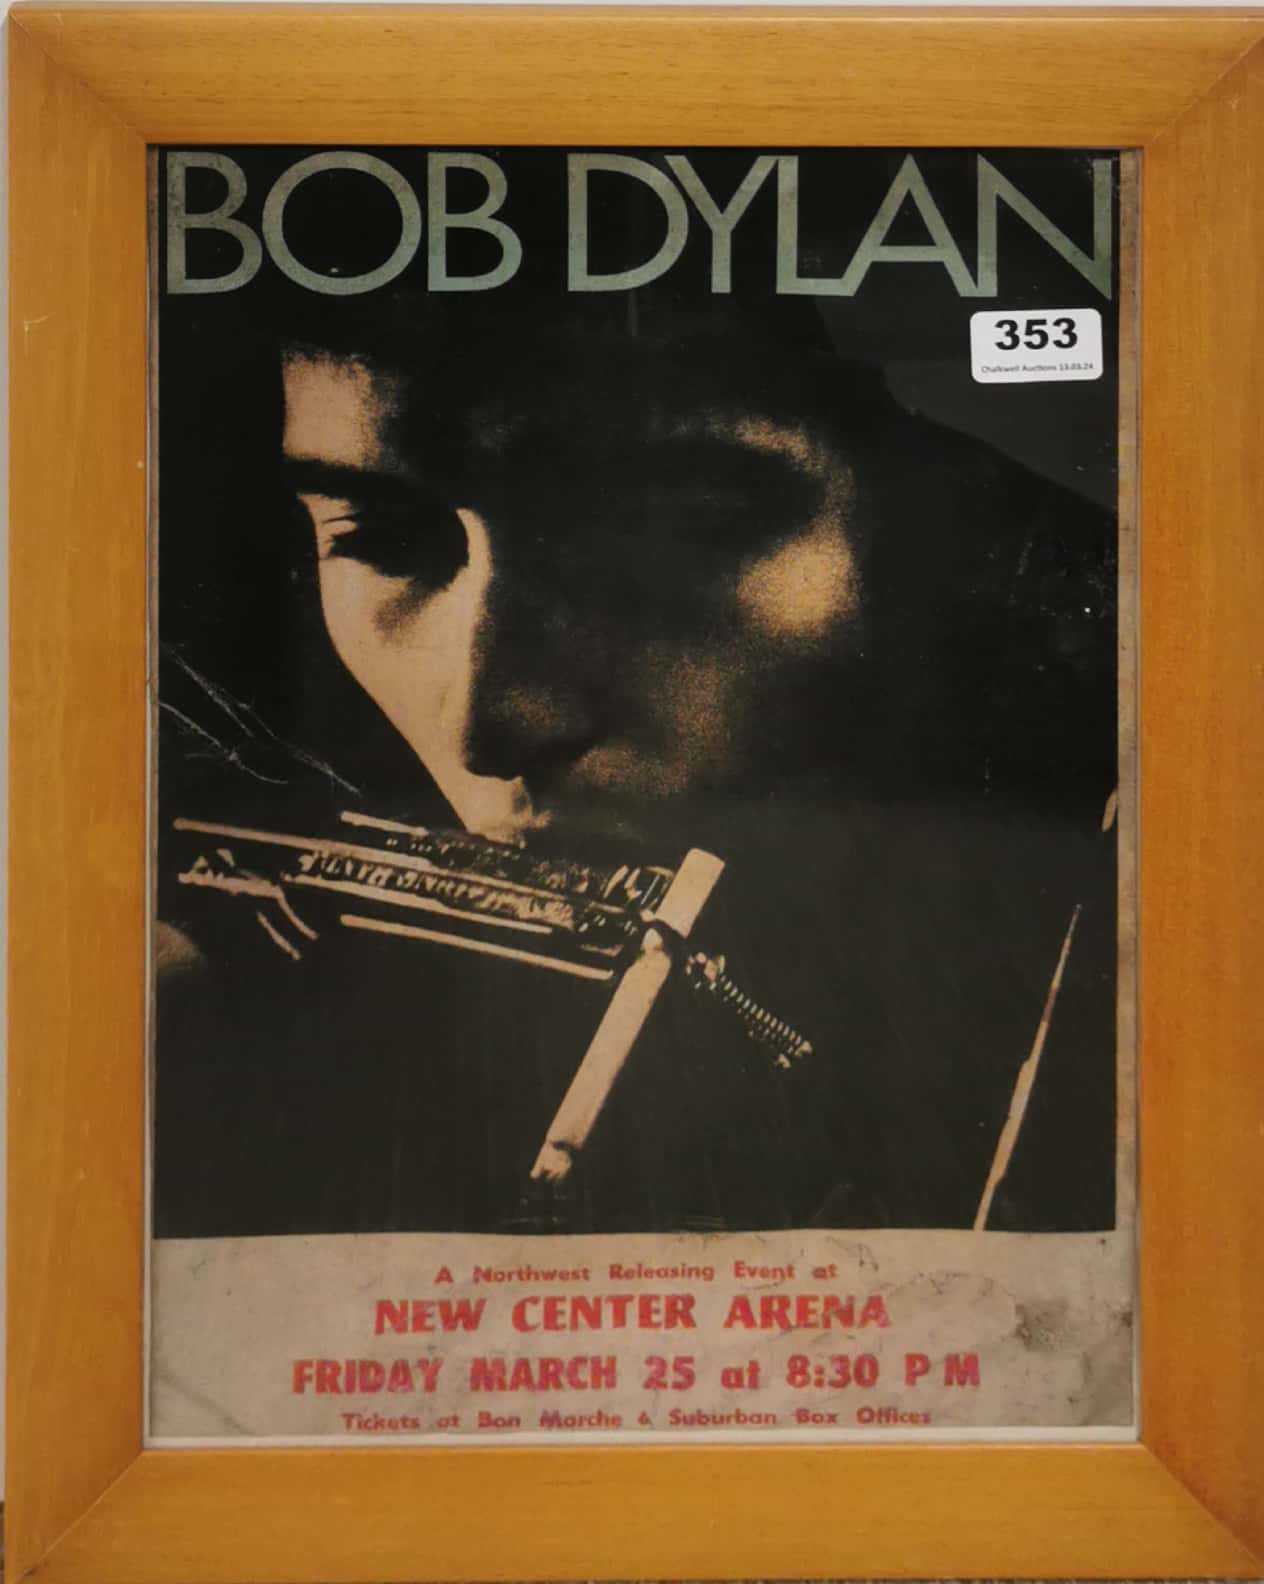 A framed poster for 'Bob Dylan' at the New Center Arena, Seattle 1966 with an autograph from the